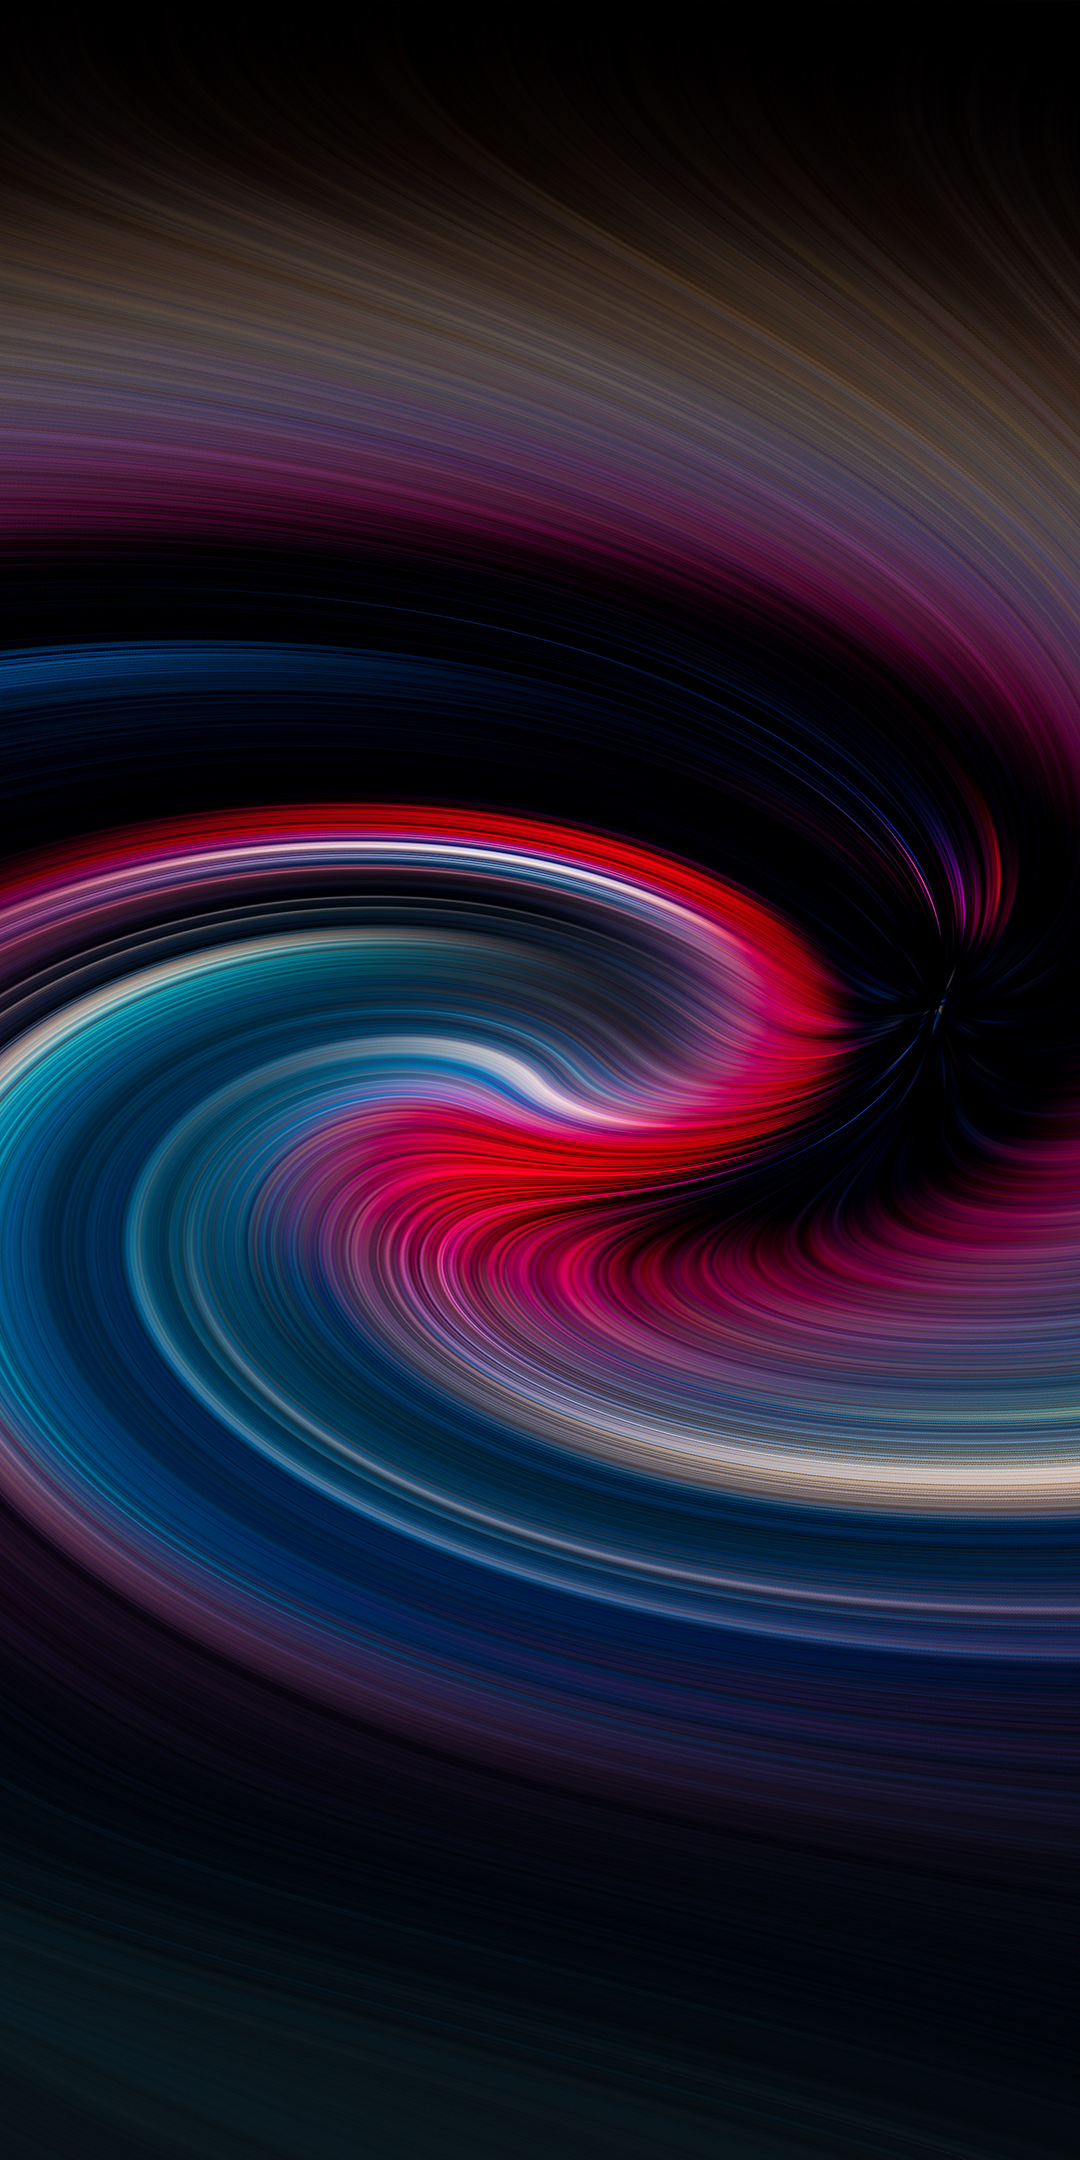 Abstract, spirals pattern, multi-colored lines, 1080x2160 wallpaper